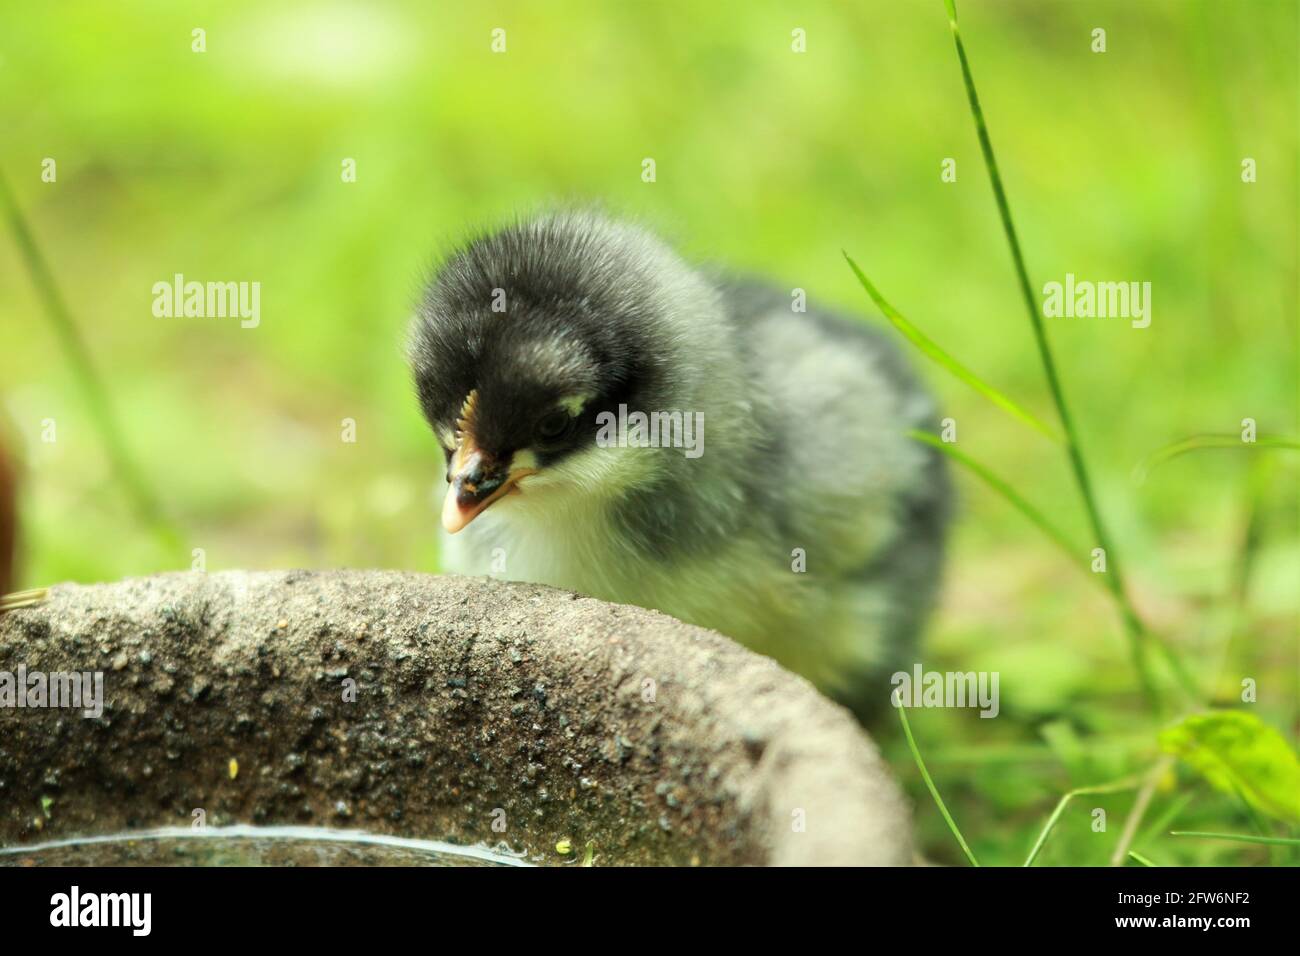 A little young chicken chick in the grass in front of a potions Stock Photo